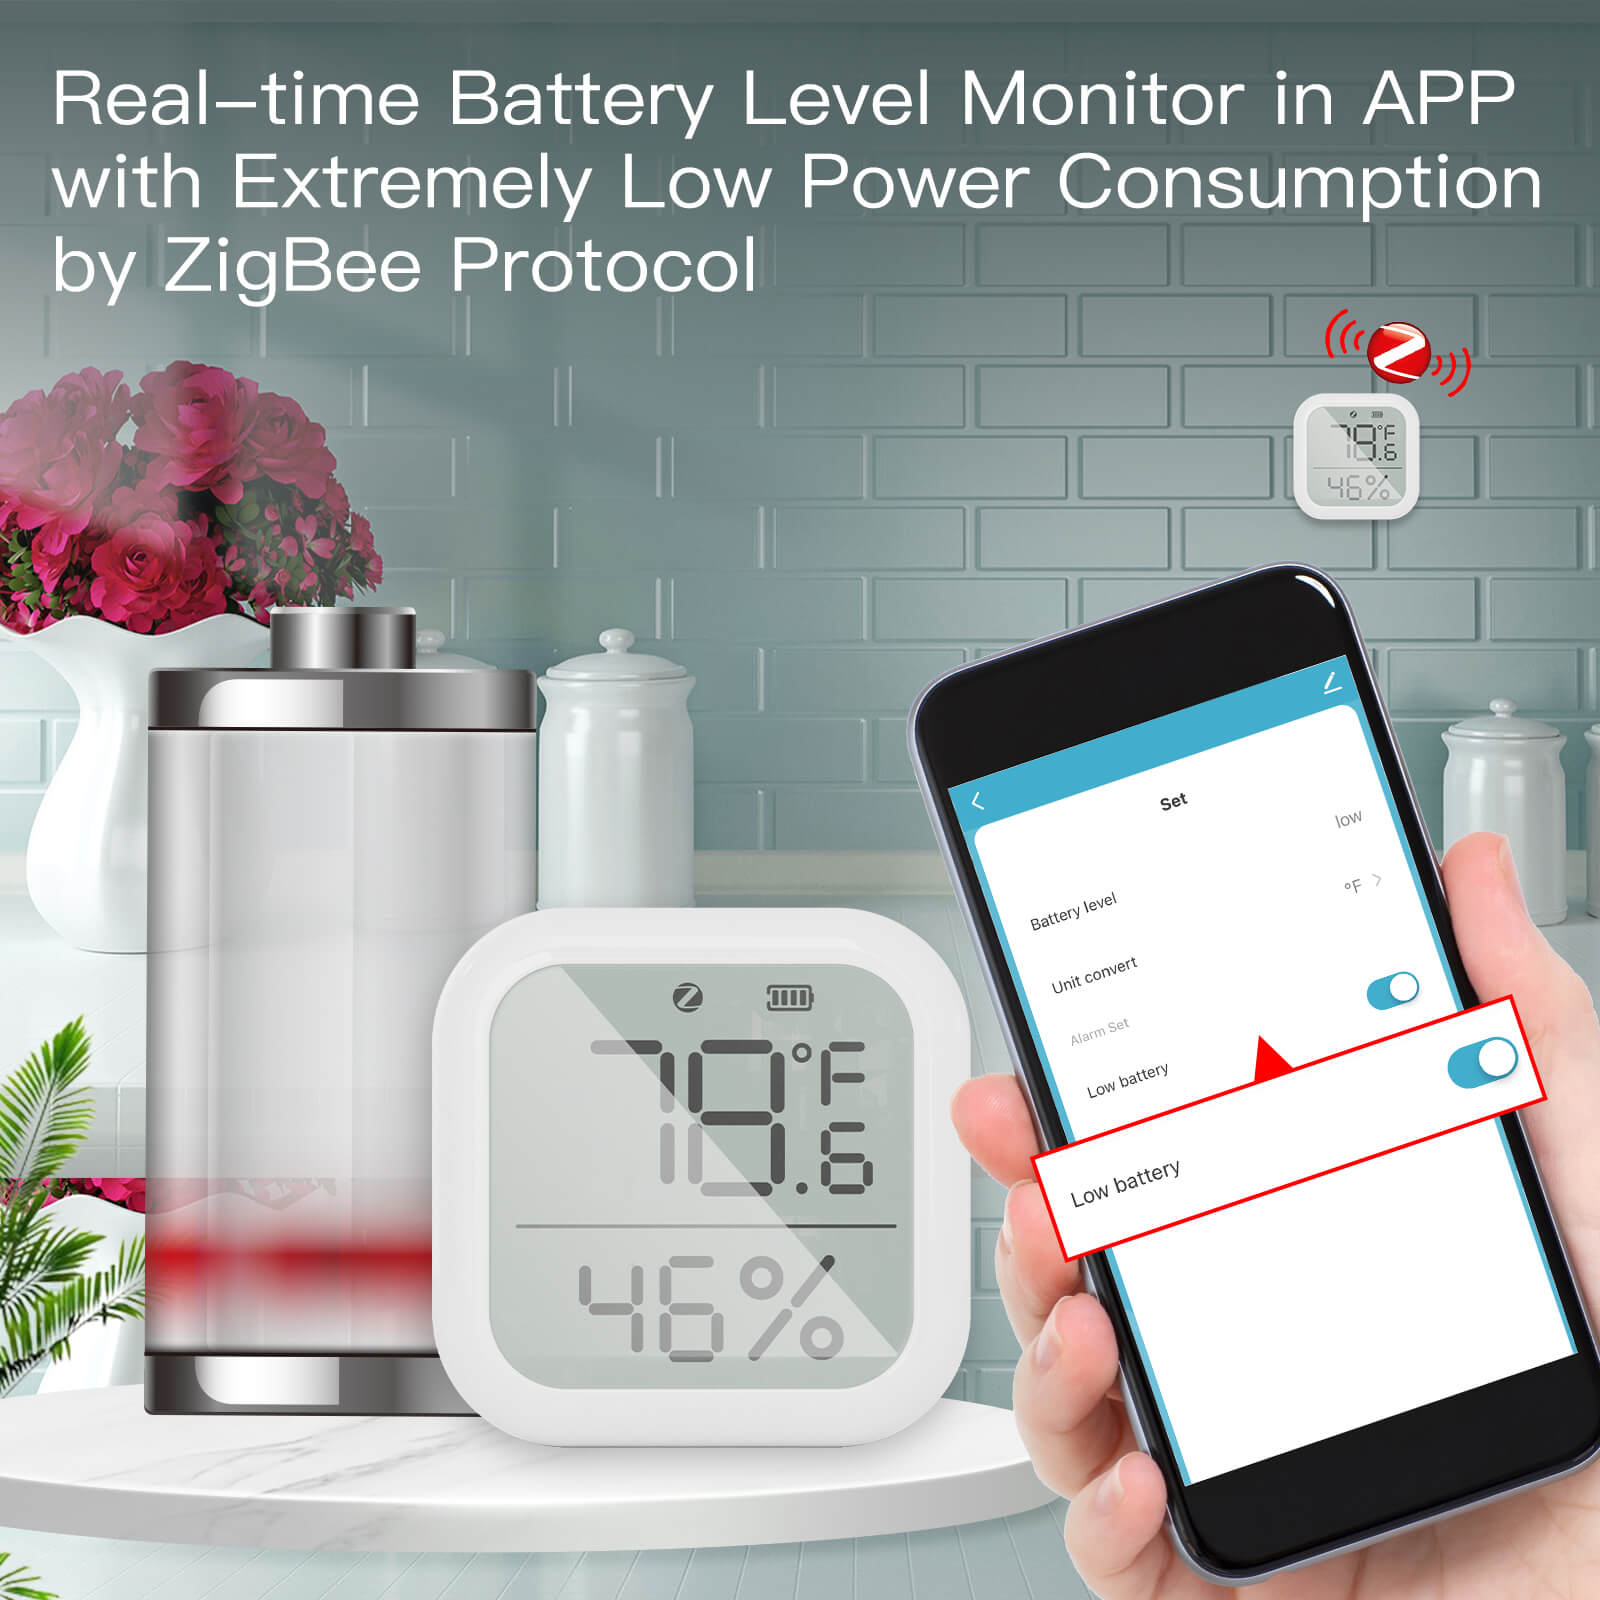 MOES Zigbee Smart Brightness Thermometer Real-time Light Sensitive  Temperature and Humidity Detector - Values jumping to zero - Zigbee - Home  Assistant Community